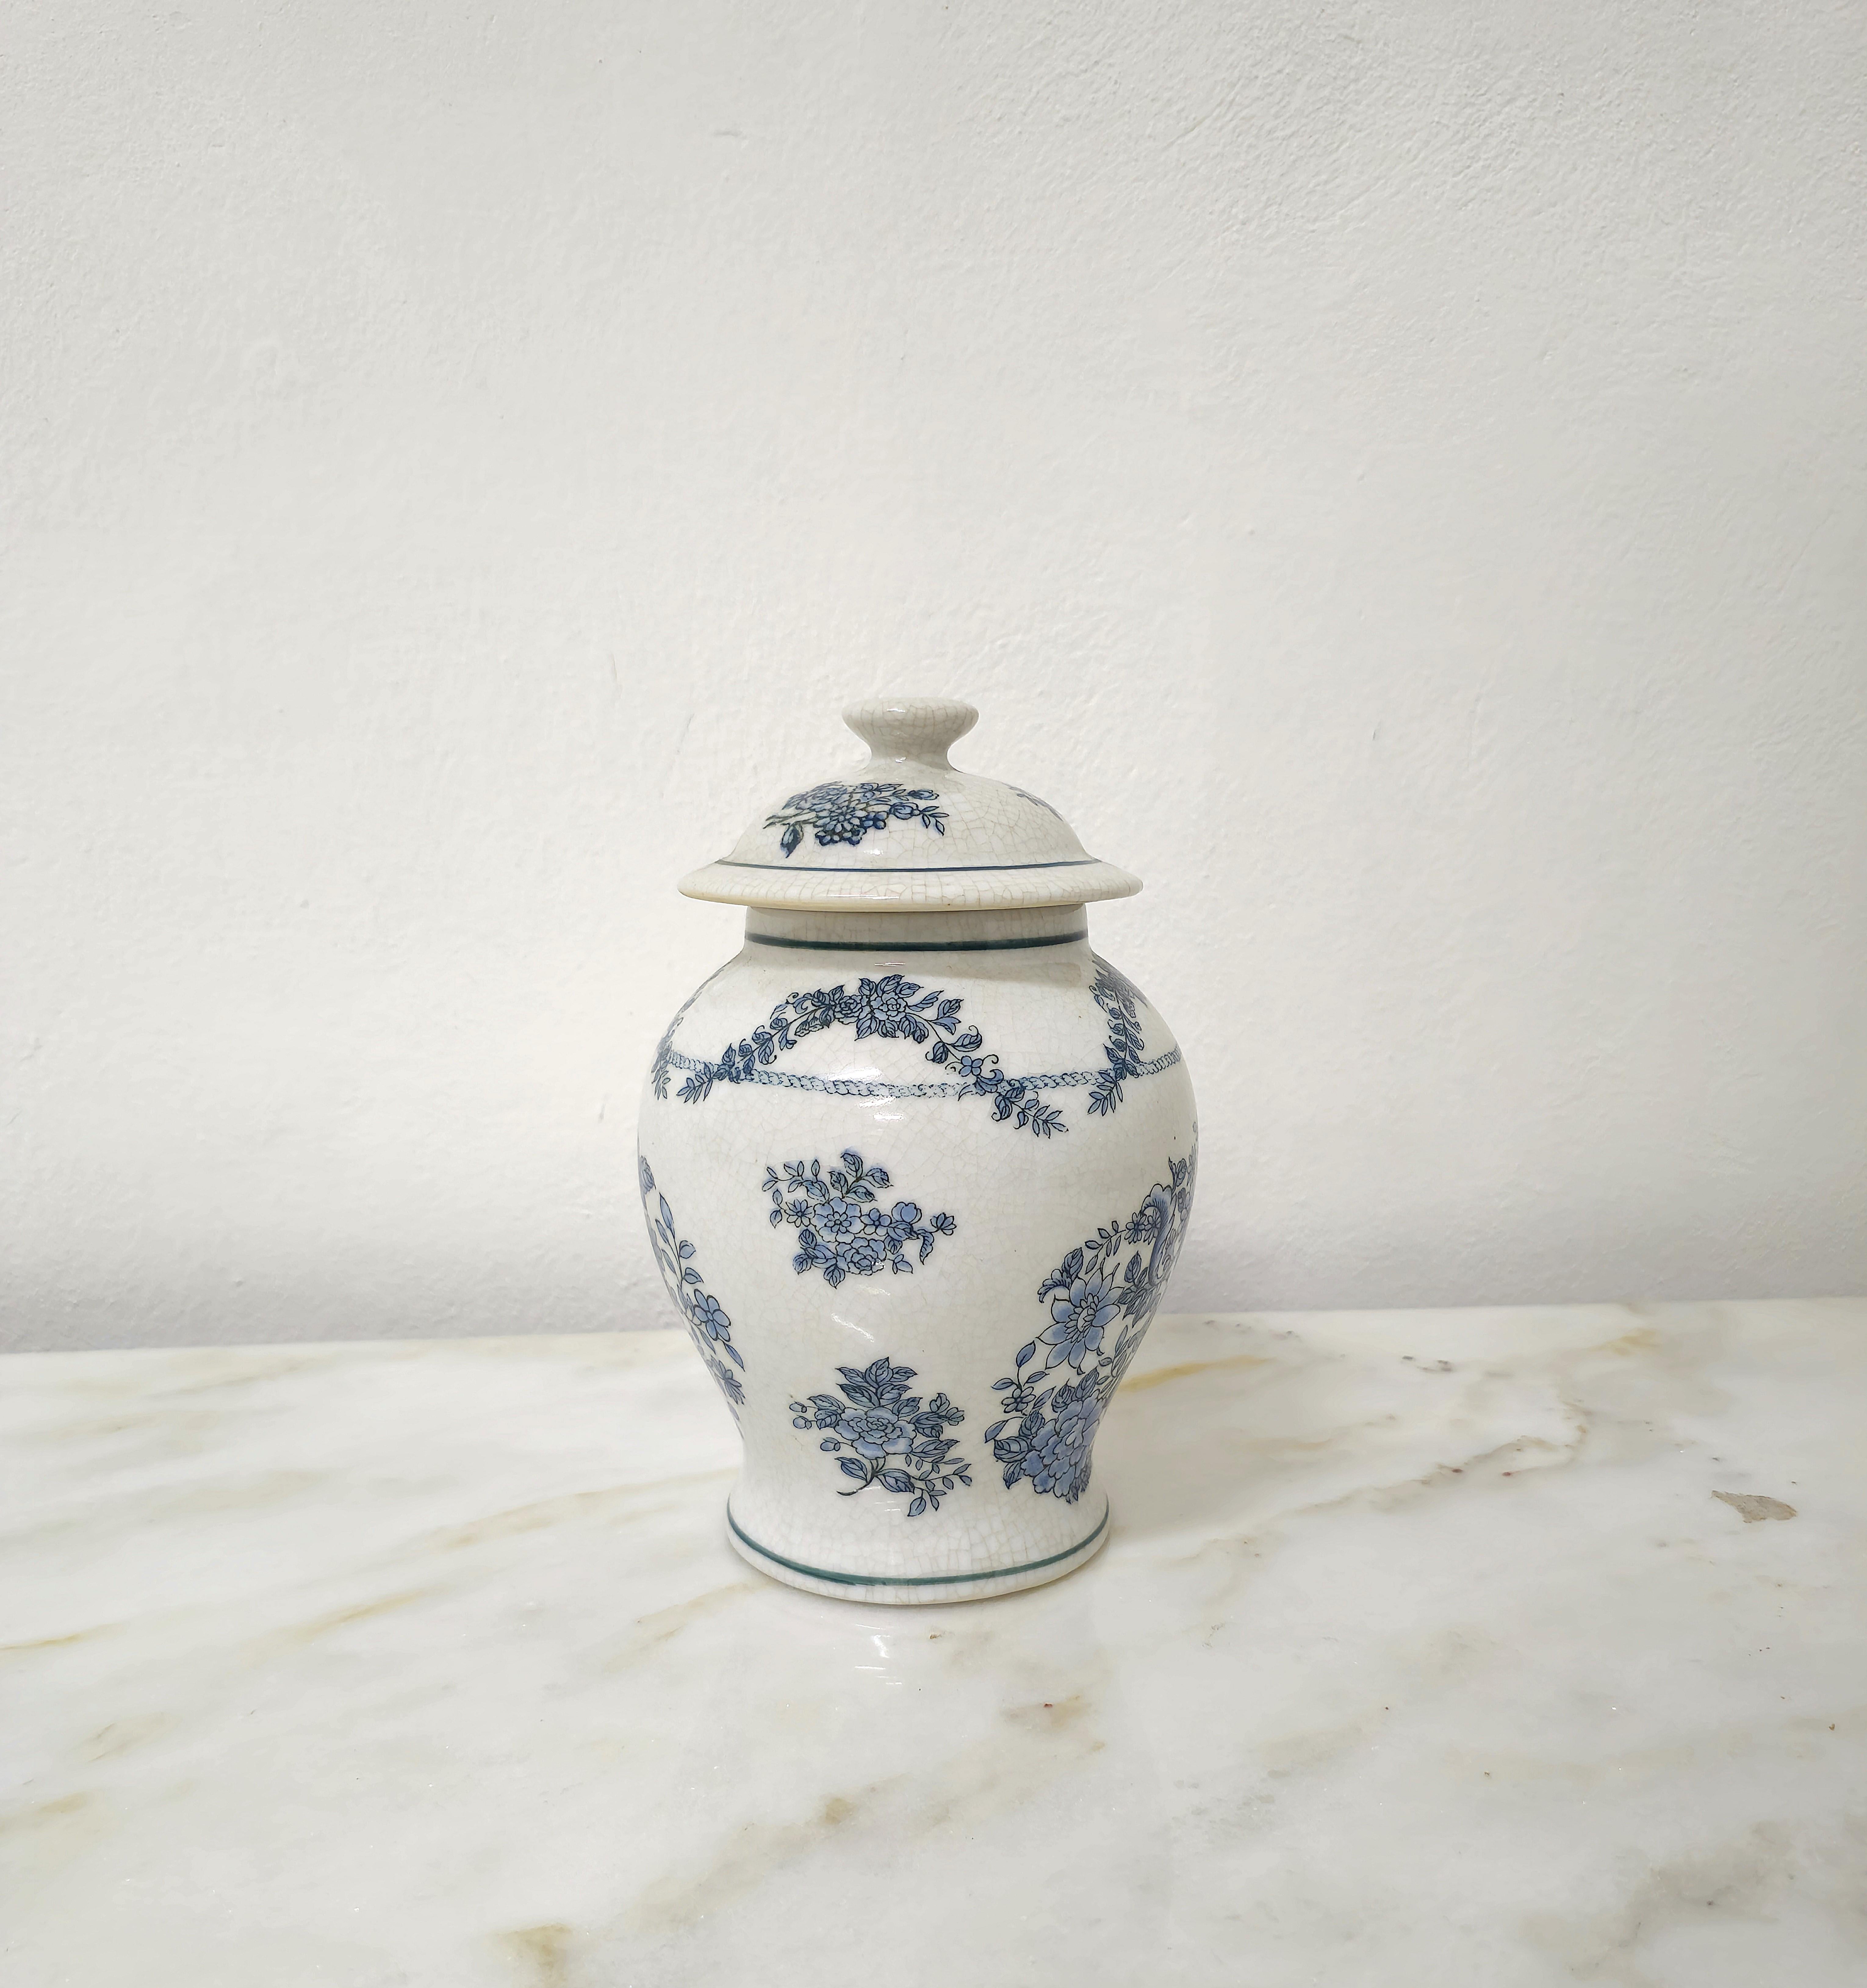 Vase with lid produced in Italy in the 1960s.
The vase was made of porcelain in shades of white, with hand-painted floral decorations in shades of lavender.



Note: We try to offer our customers an excellent service even in shipments all over the